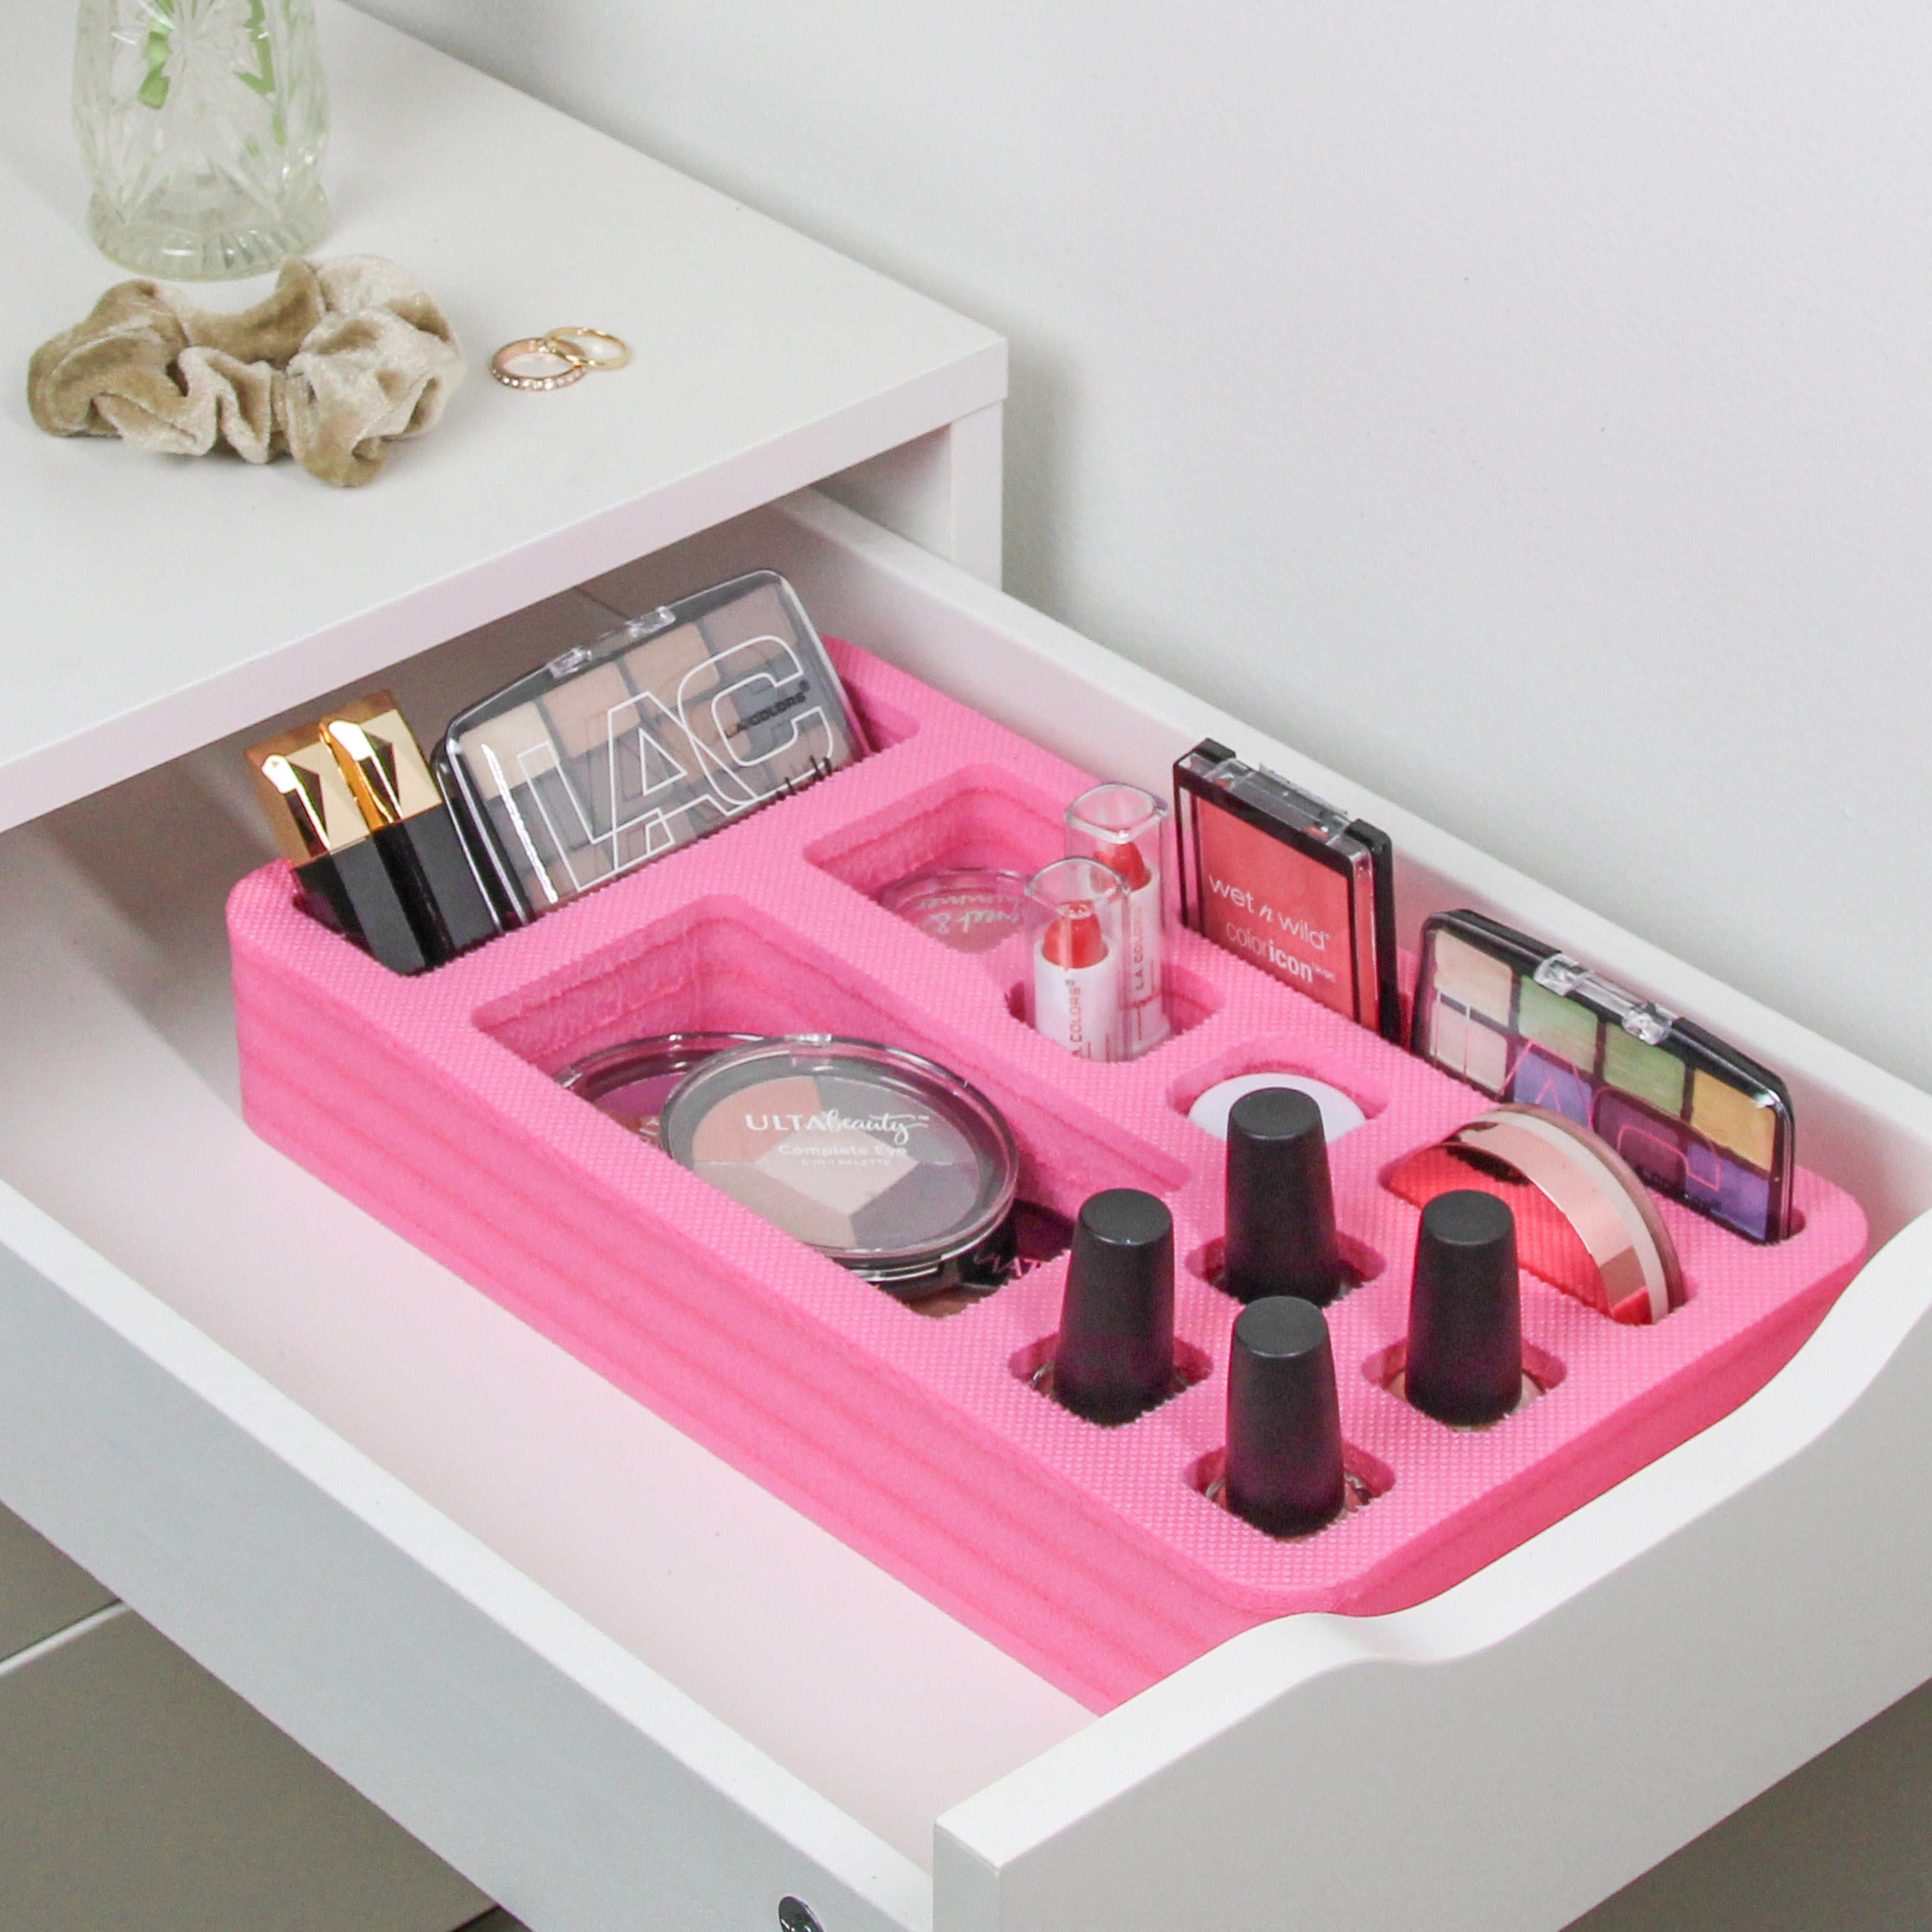 Makeup Drawer Tray Waterproof Durable Foam InsertHome Bathroom Bedroom Office 6.9 x 12.9 Inches 11 CompartmentsLipstick Eyeliner Cosmetics More